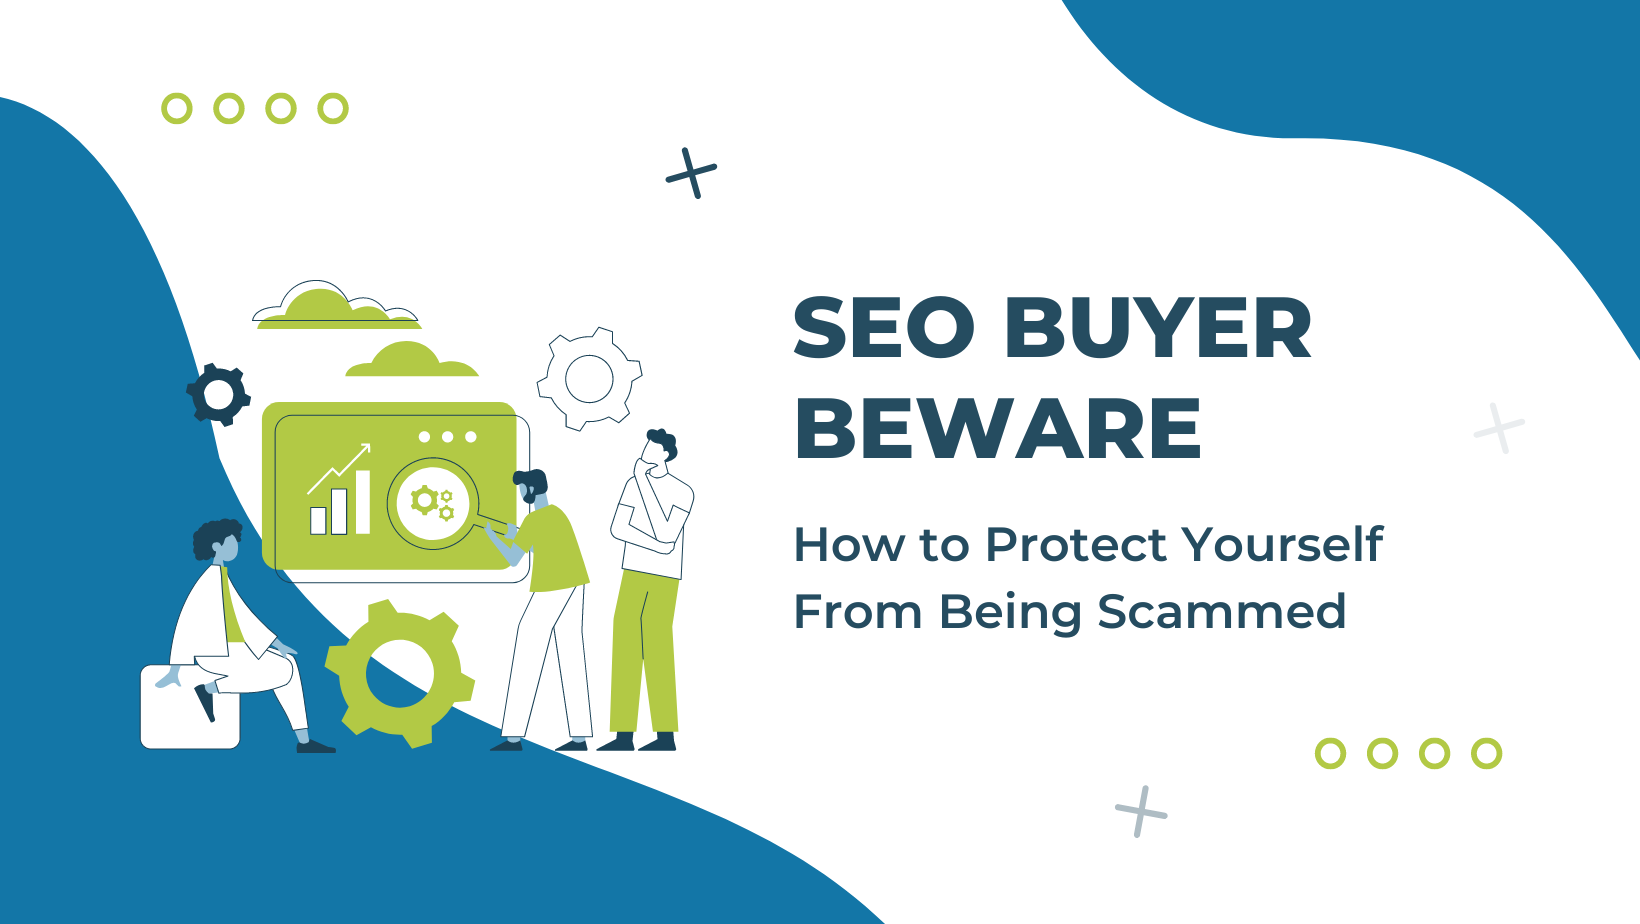 "SEO Buyer Beware: How to Protect Yourself From Being Scammed" graphic